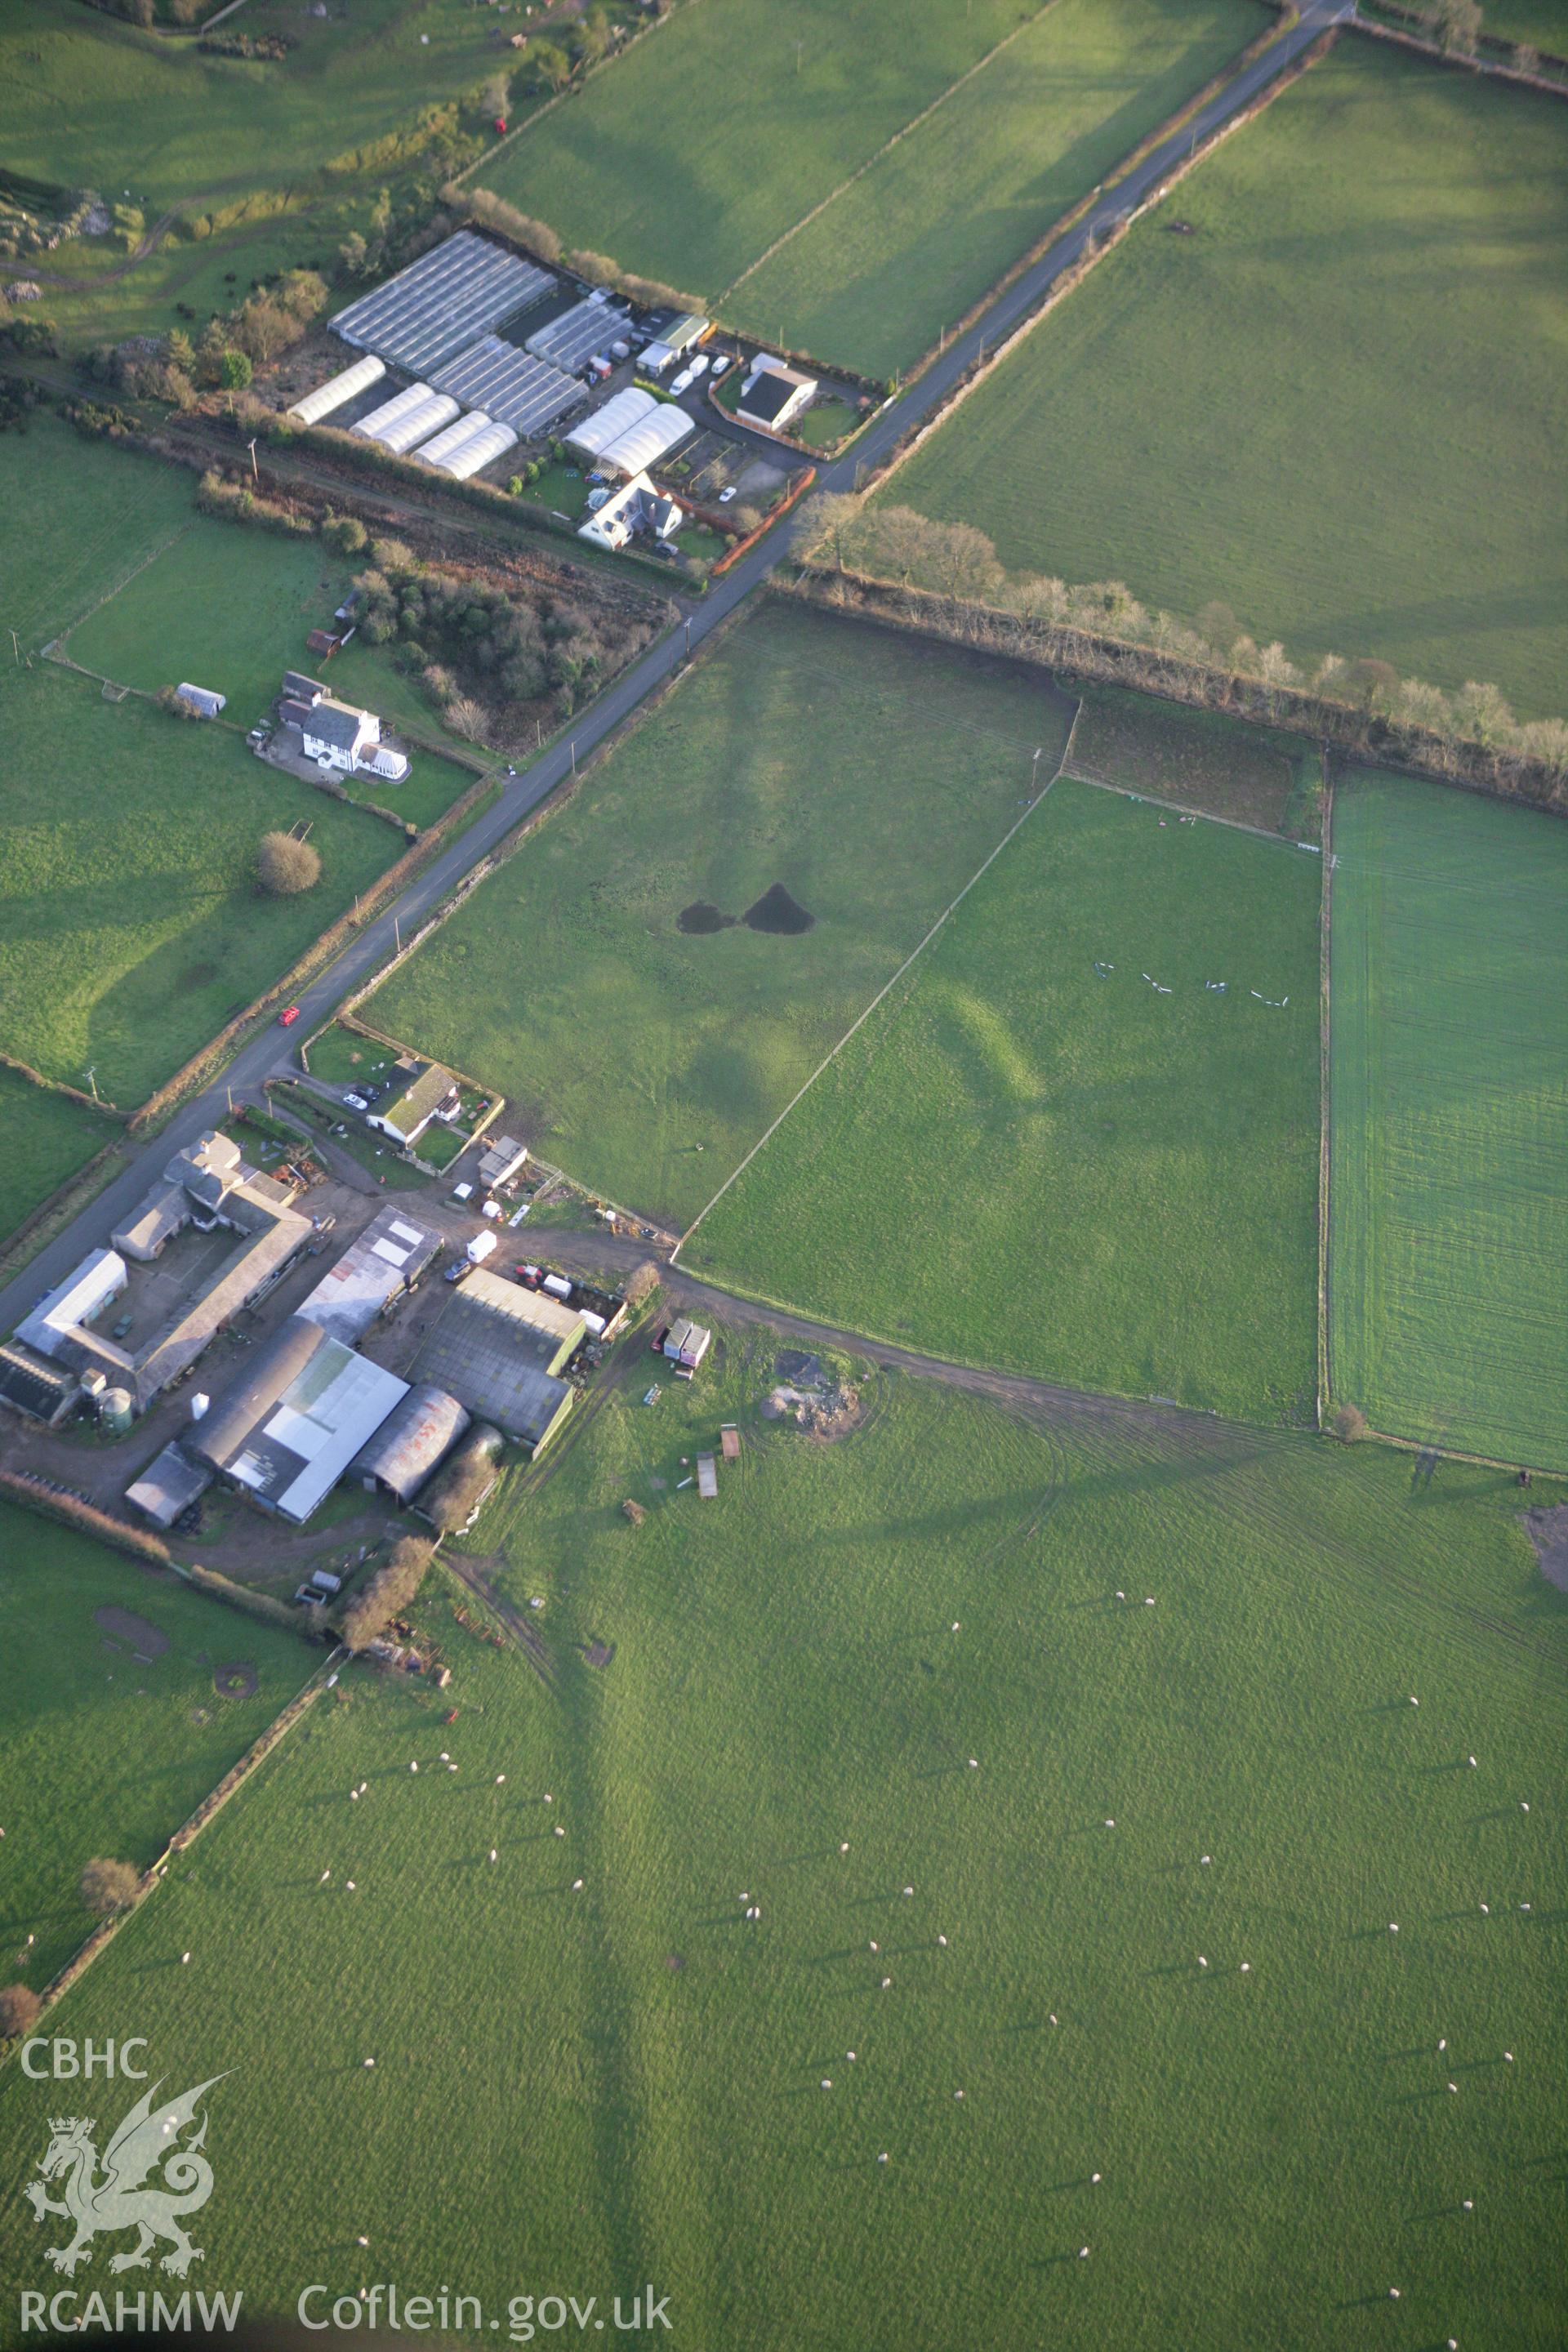 RCAHMW colour oblique aerial photograph of a circle, barrow and linear earthworks at Holywell. Taken on 10 December 2009 by Toby Driver